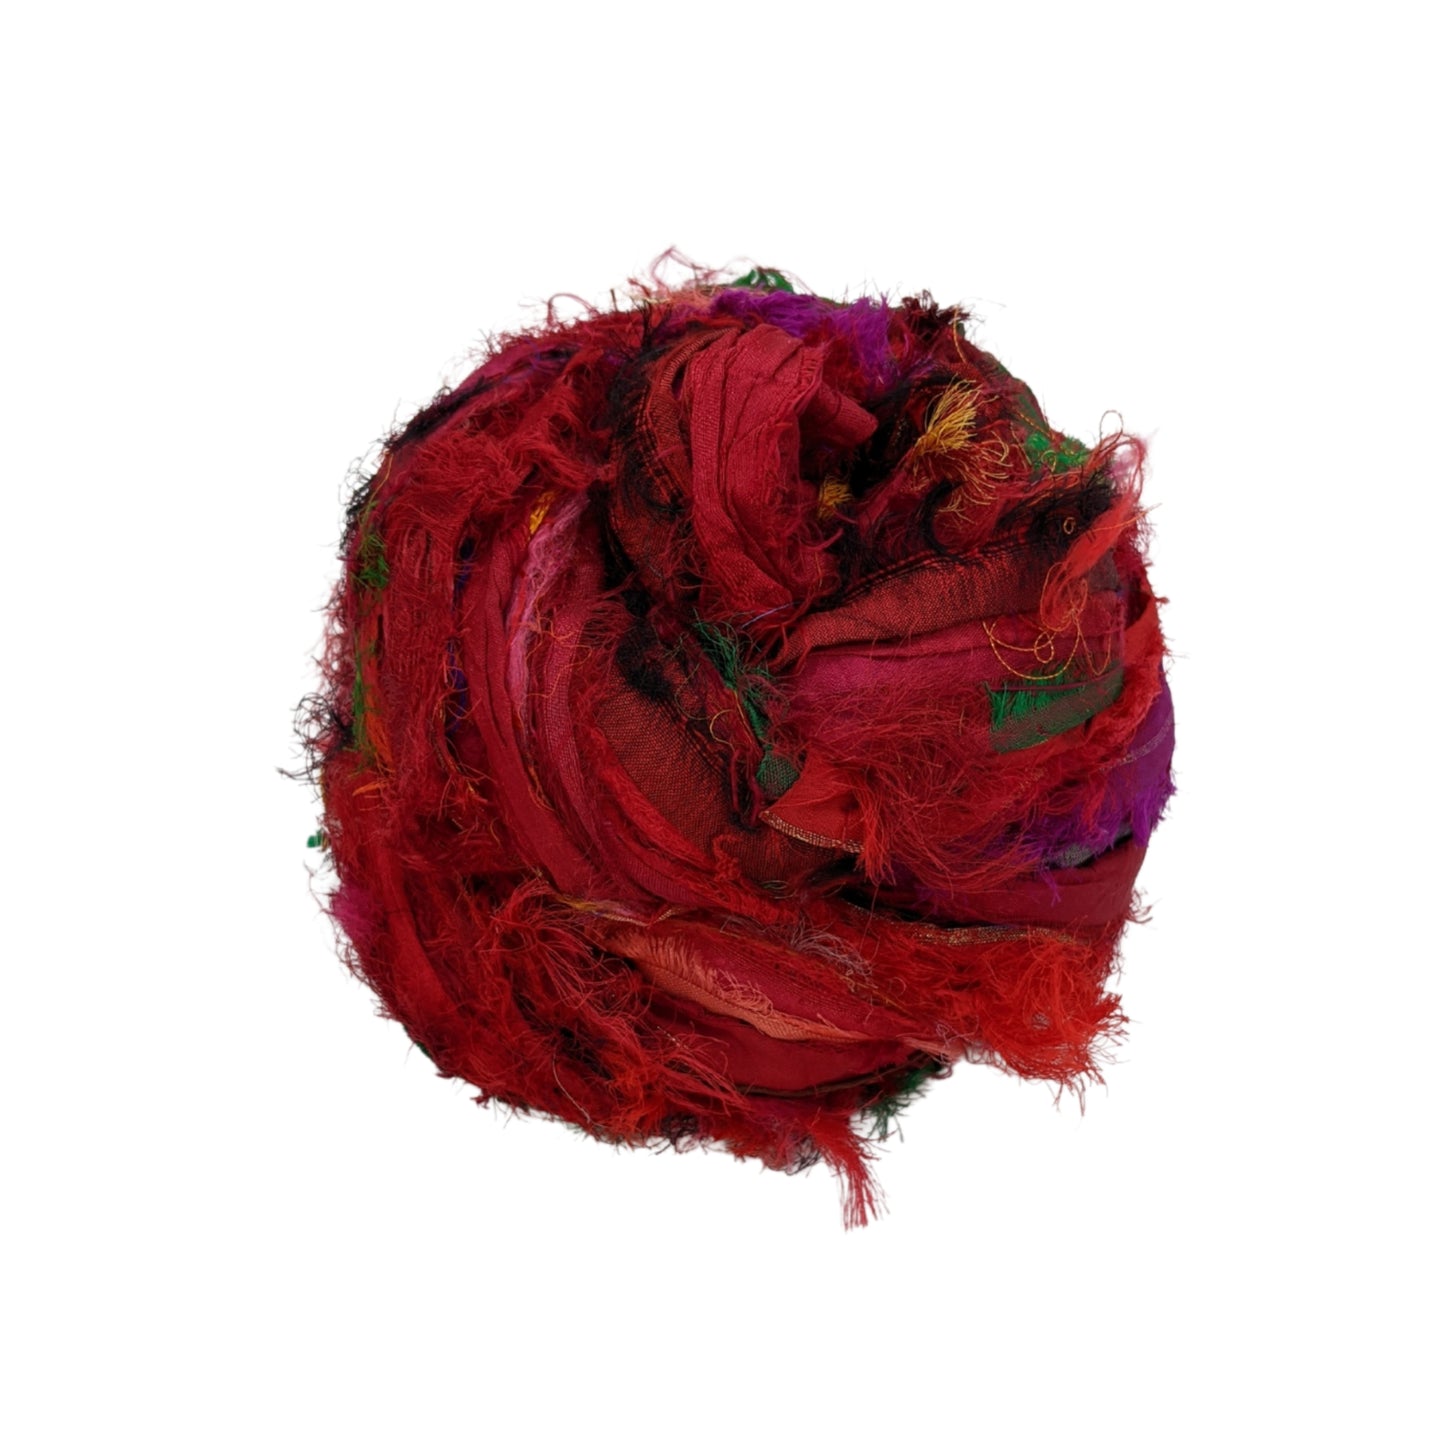 An overhead view of the red windswept sari ribbon on a white background.